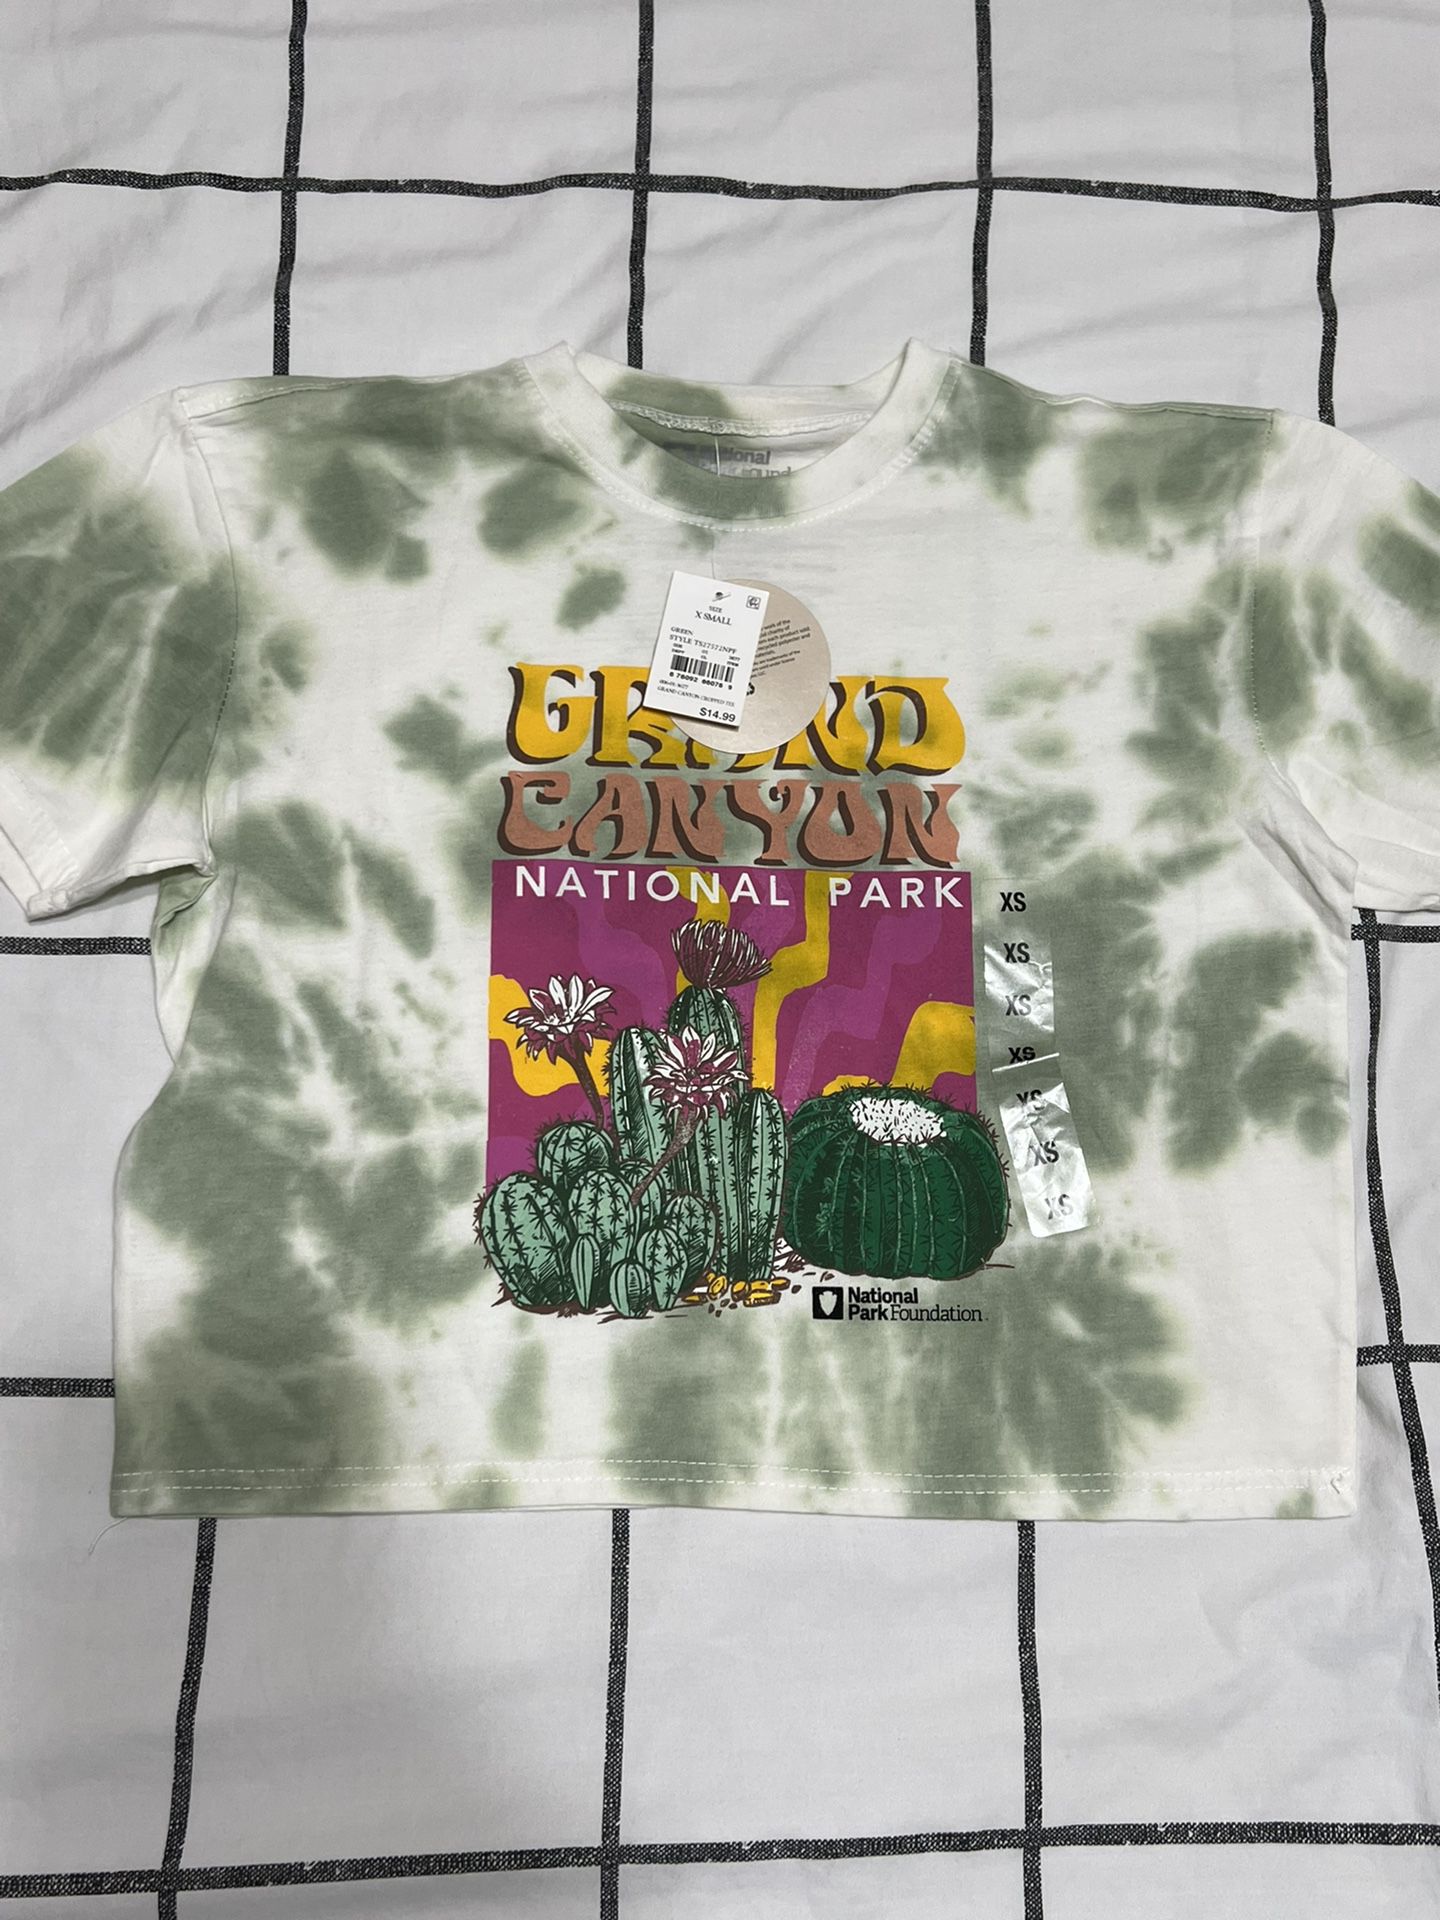 Large Bad Bunny Moscow Mule Video Target Shirt Grand Canyon Crop Top Un  Verano Sin Ti - Brand New W/ Tags for Sale in Los Angeles, CA - OfferUp